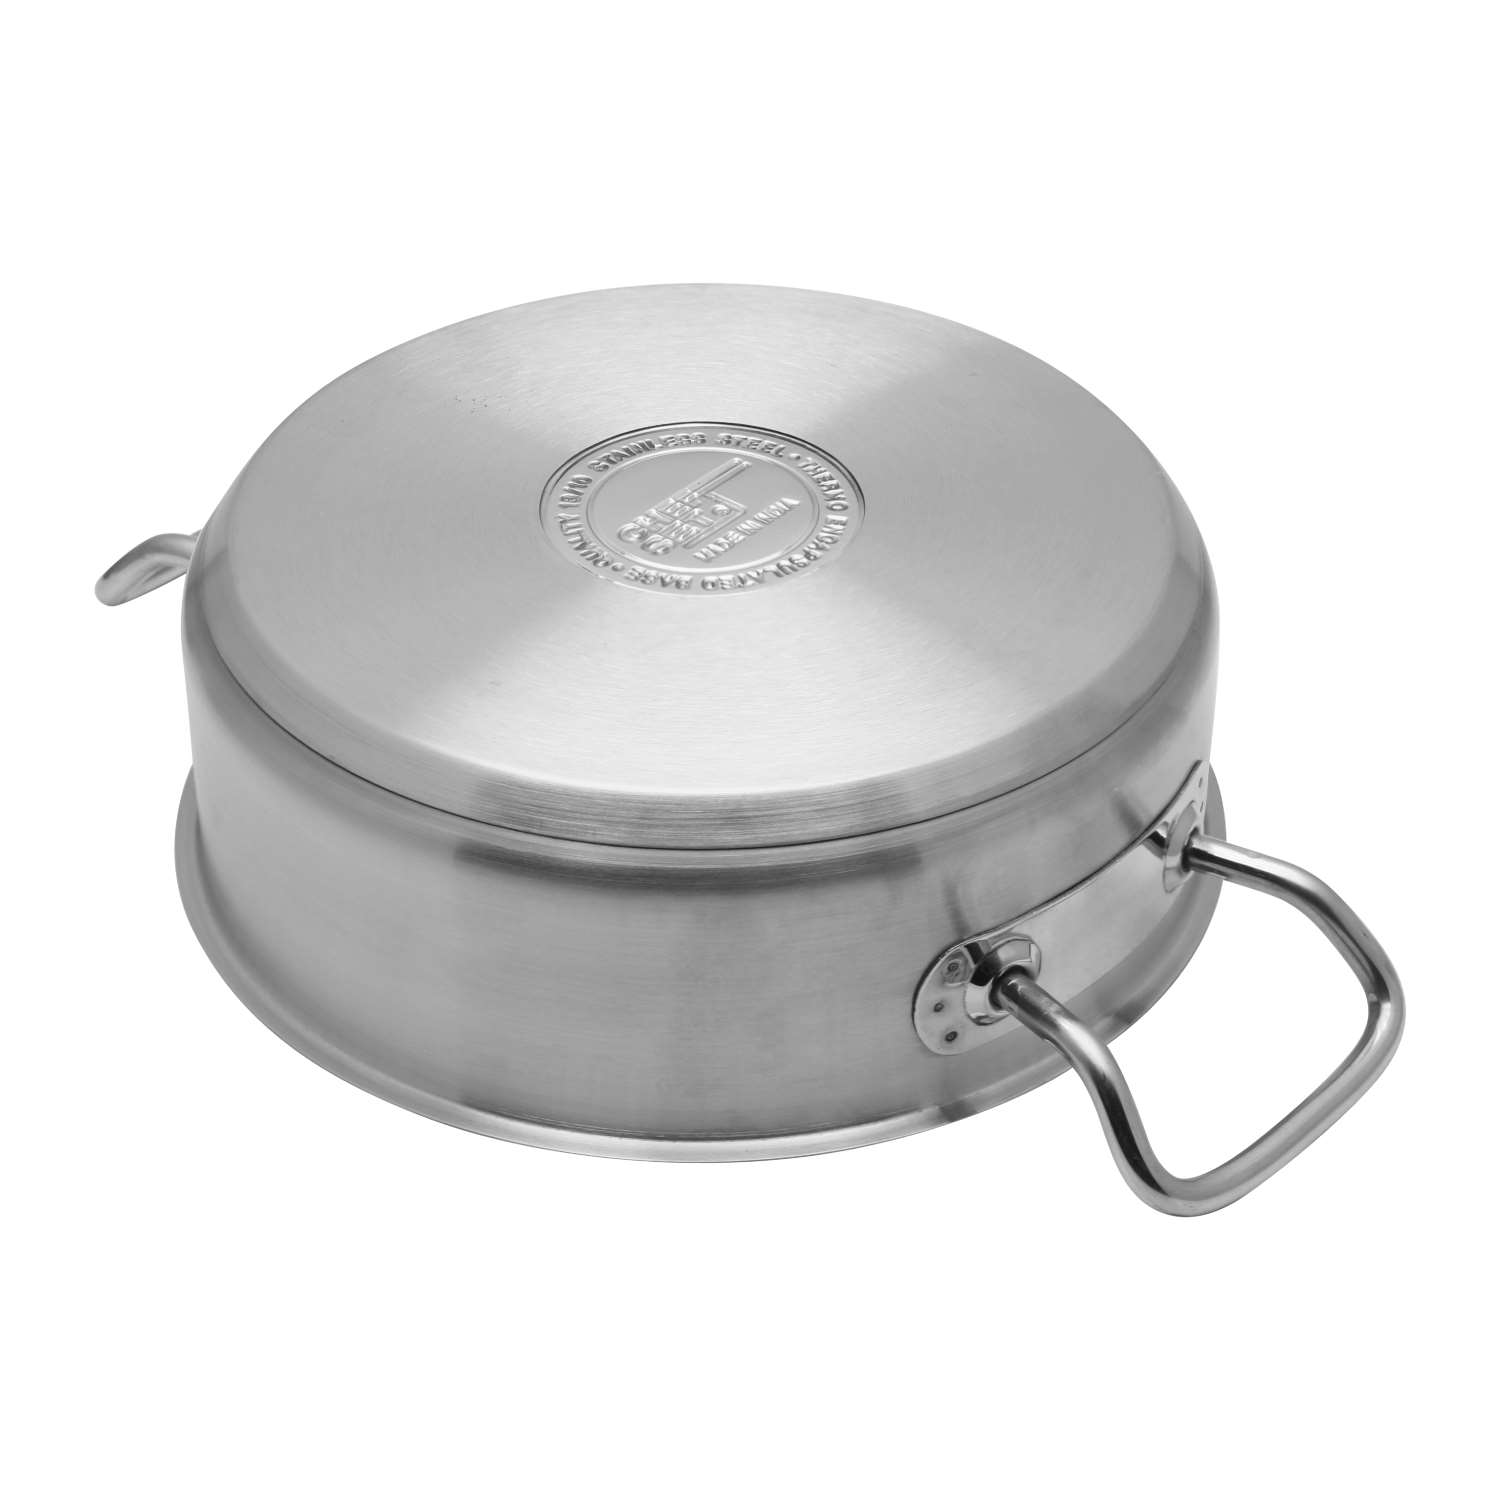 Chefset Steel Low Casserole Low Cooking Pot With Lid And Double Handle 22Cm